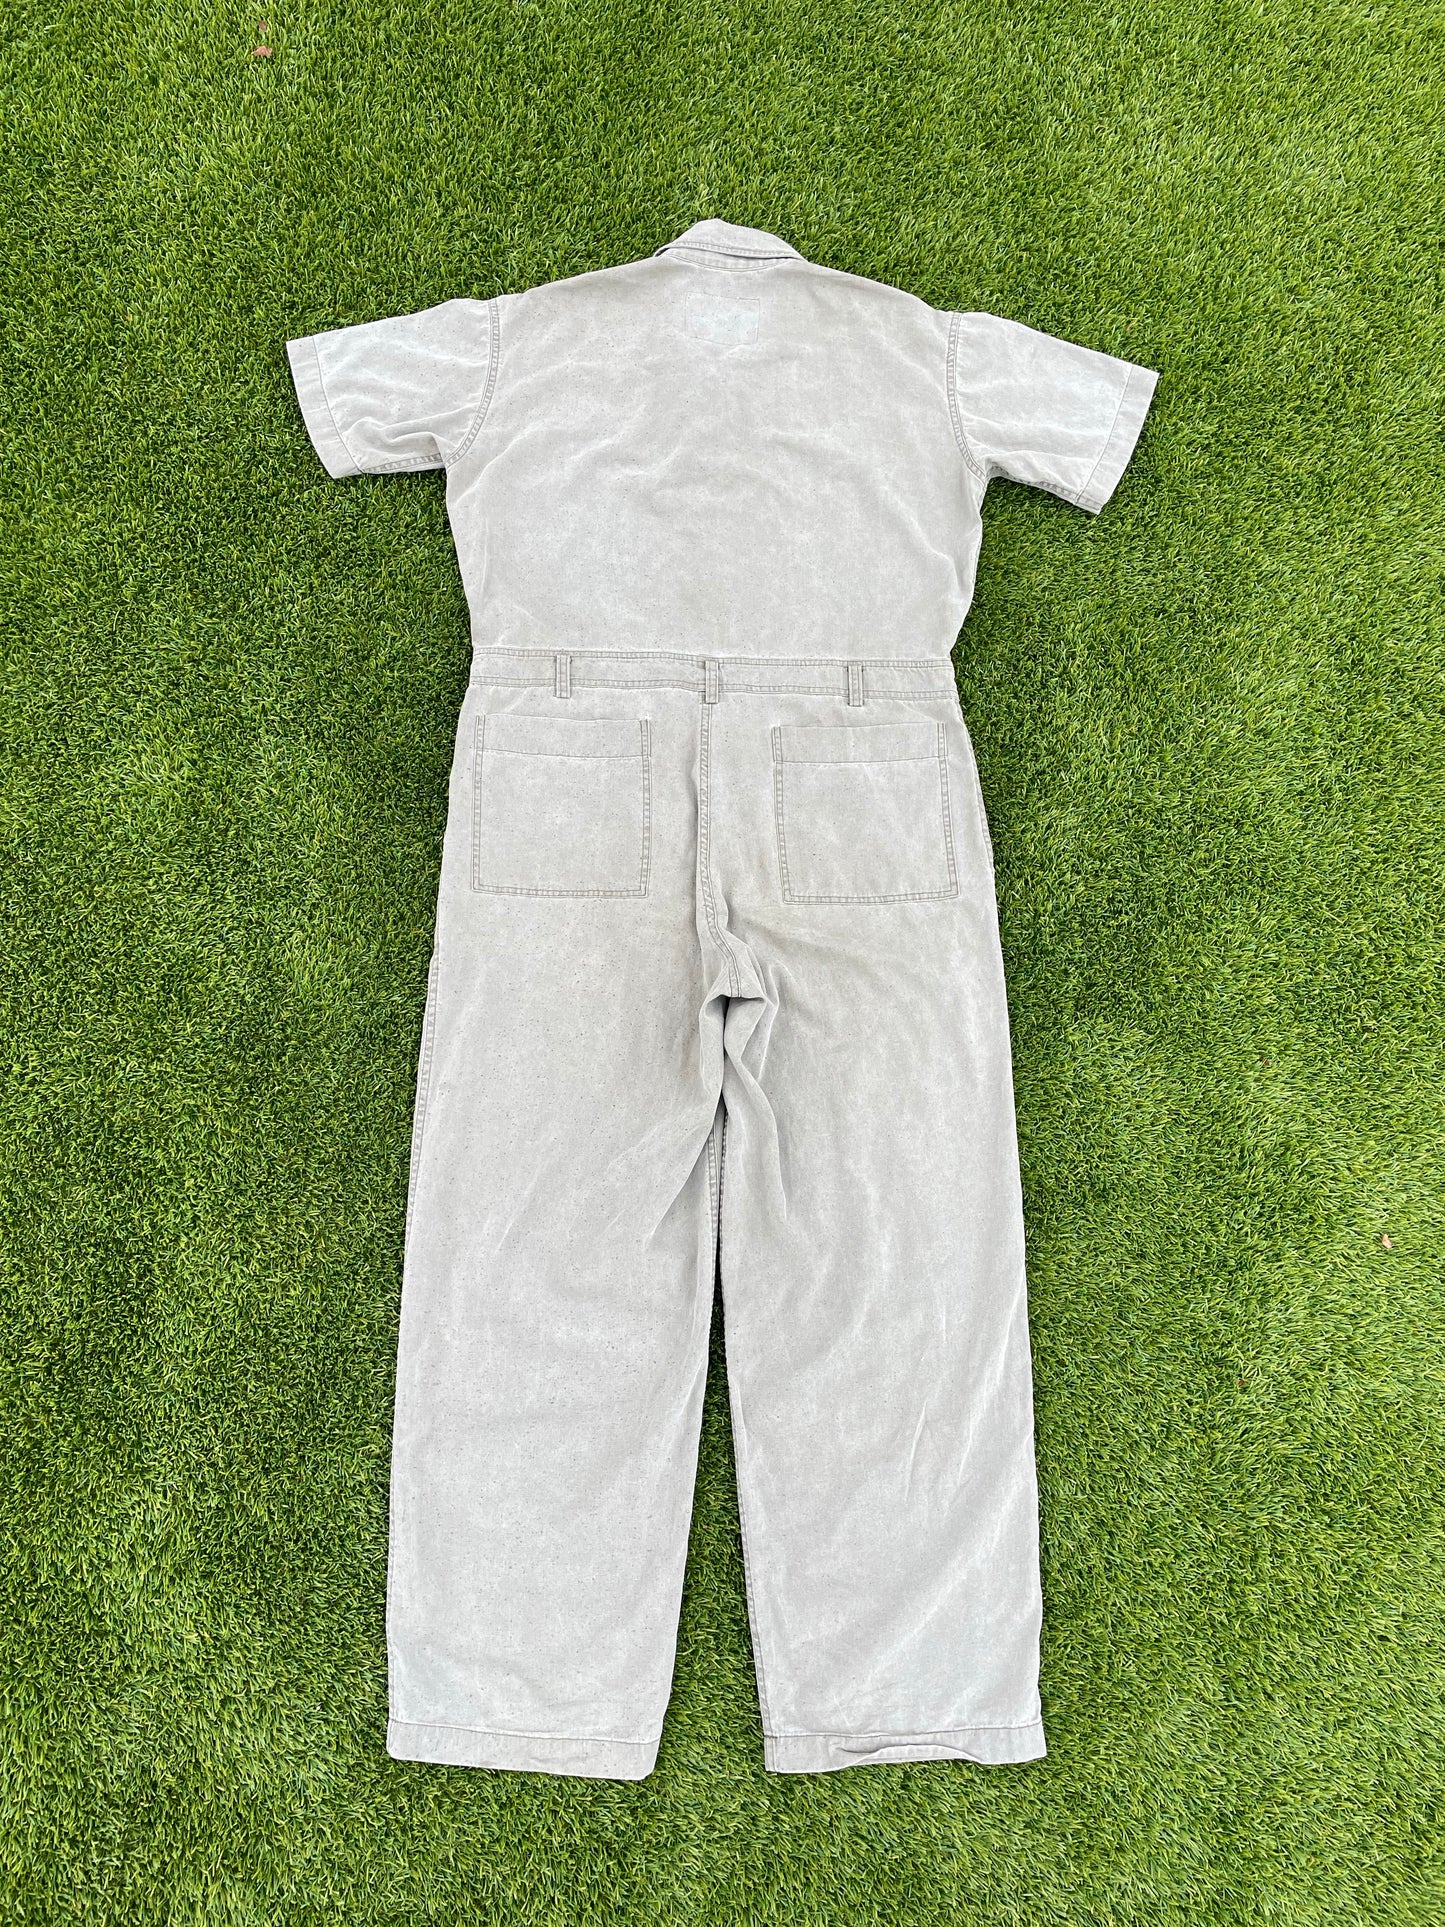 Undercover “Groupie” Coverall Jumpsuit